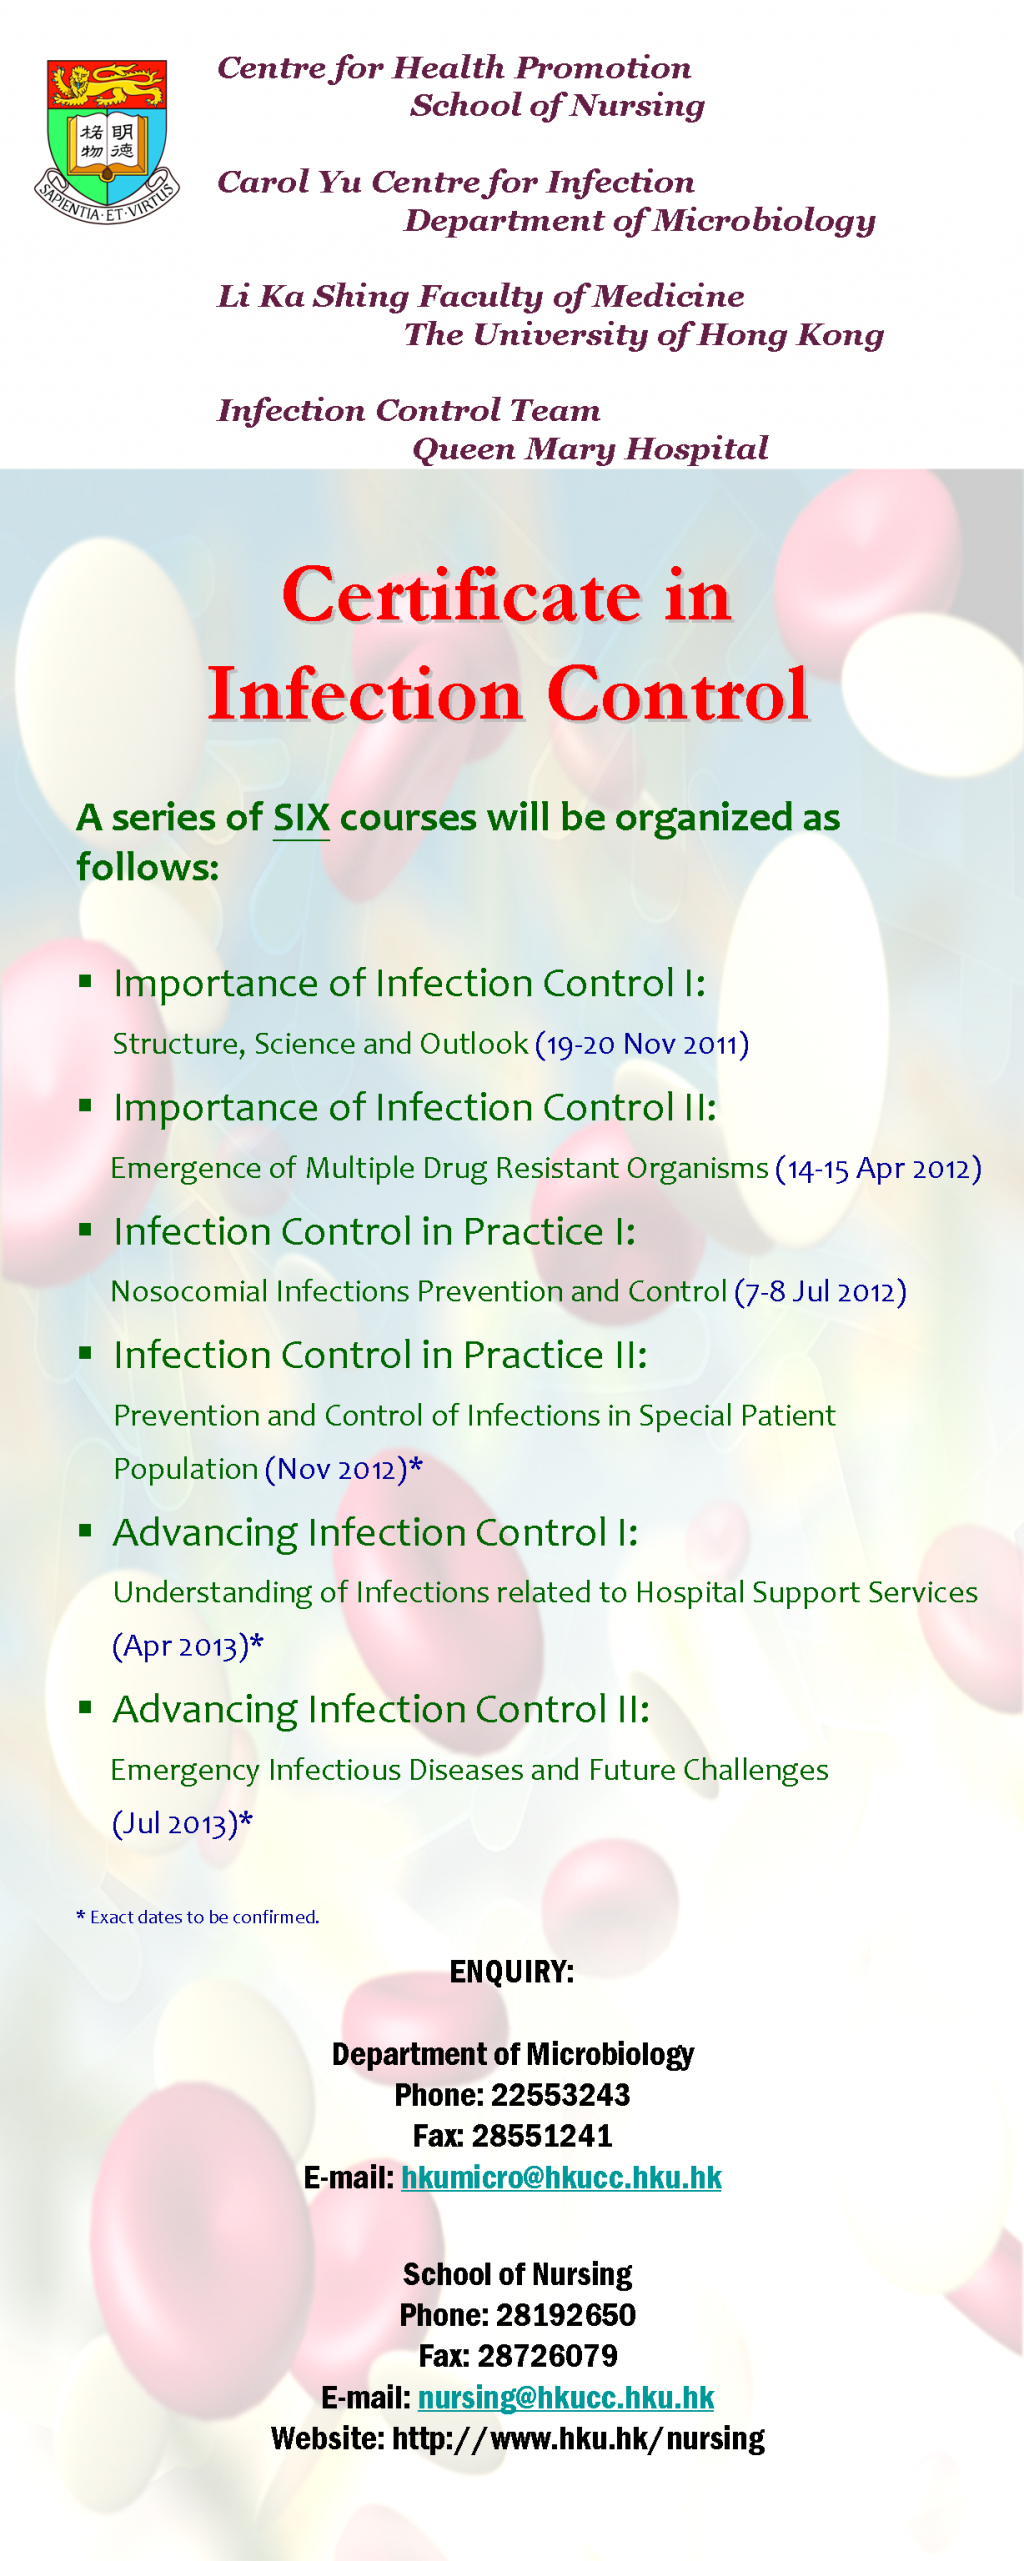 Infection Control Course (2011-2013) Module 2 to be held on 14-15 Apr 2012